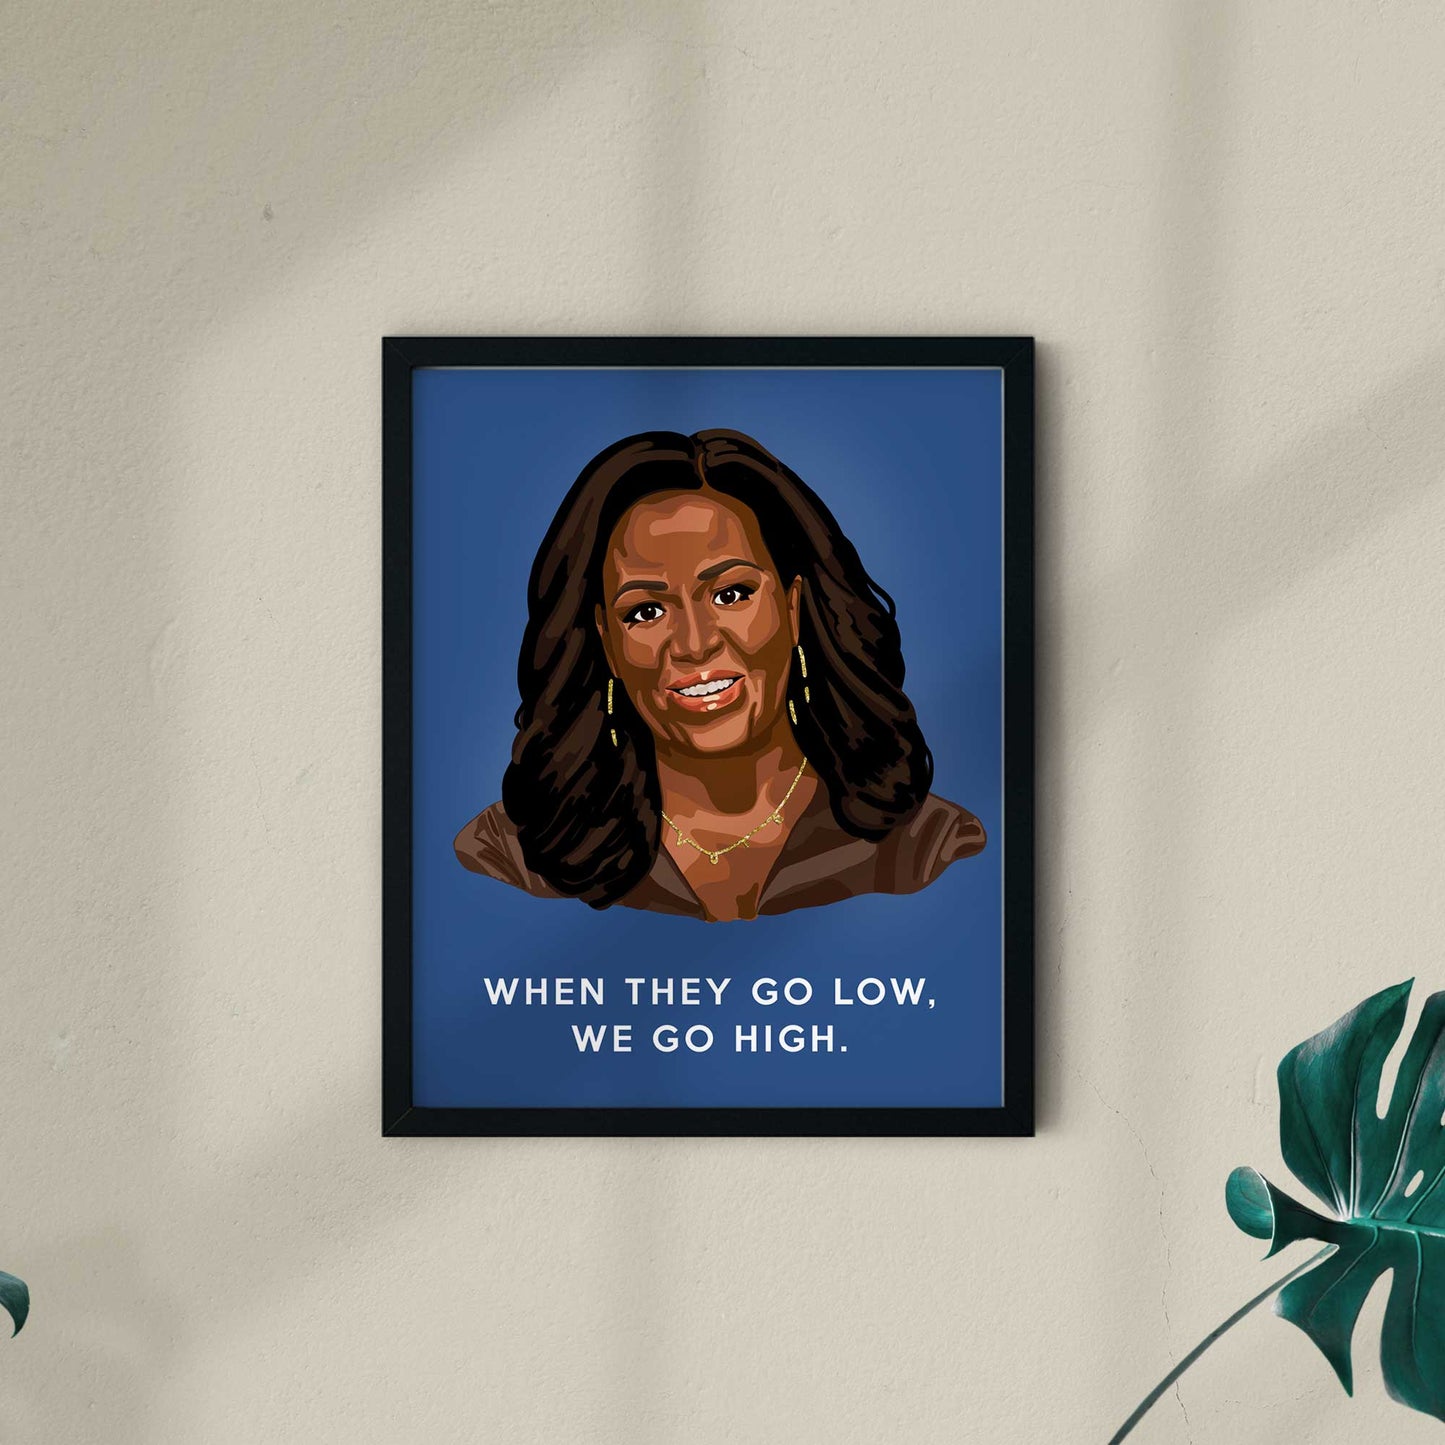 Michelle Obama portrait feat. 'When They Go Low' quote, black frame without mat - Candid Almond